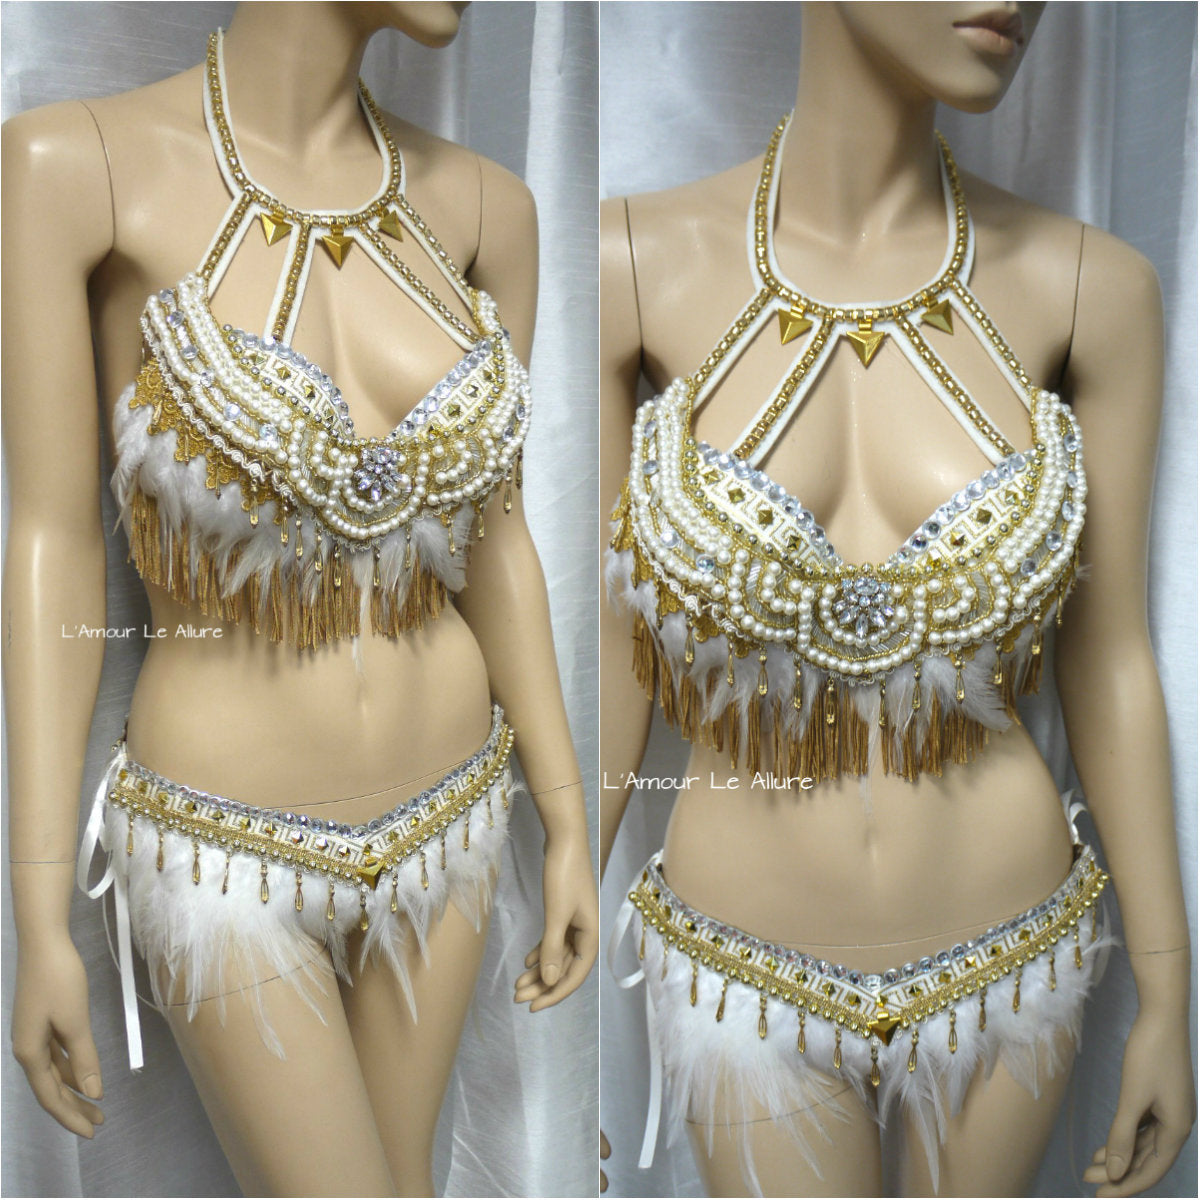 Gold and White Feather Native Indian Fringe Bra and Skirt